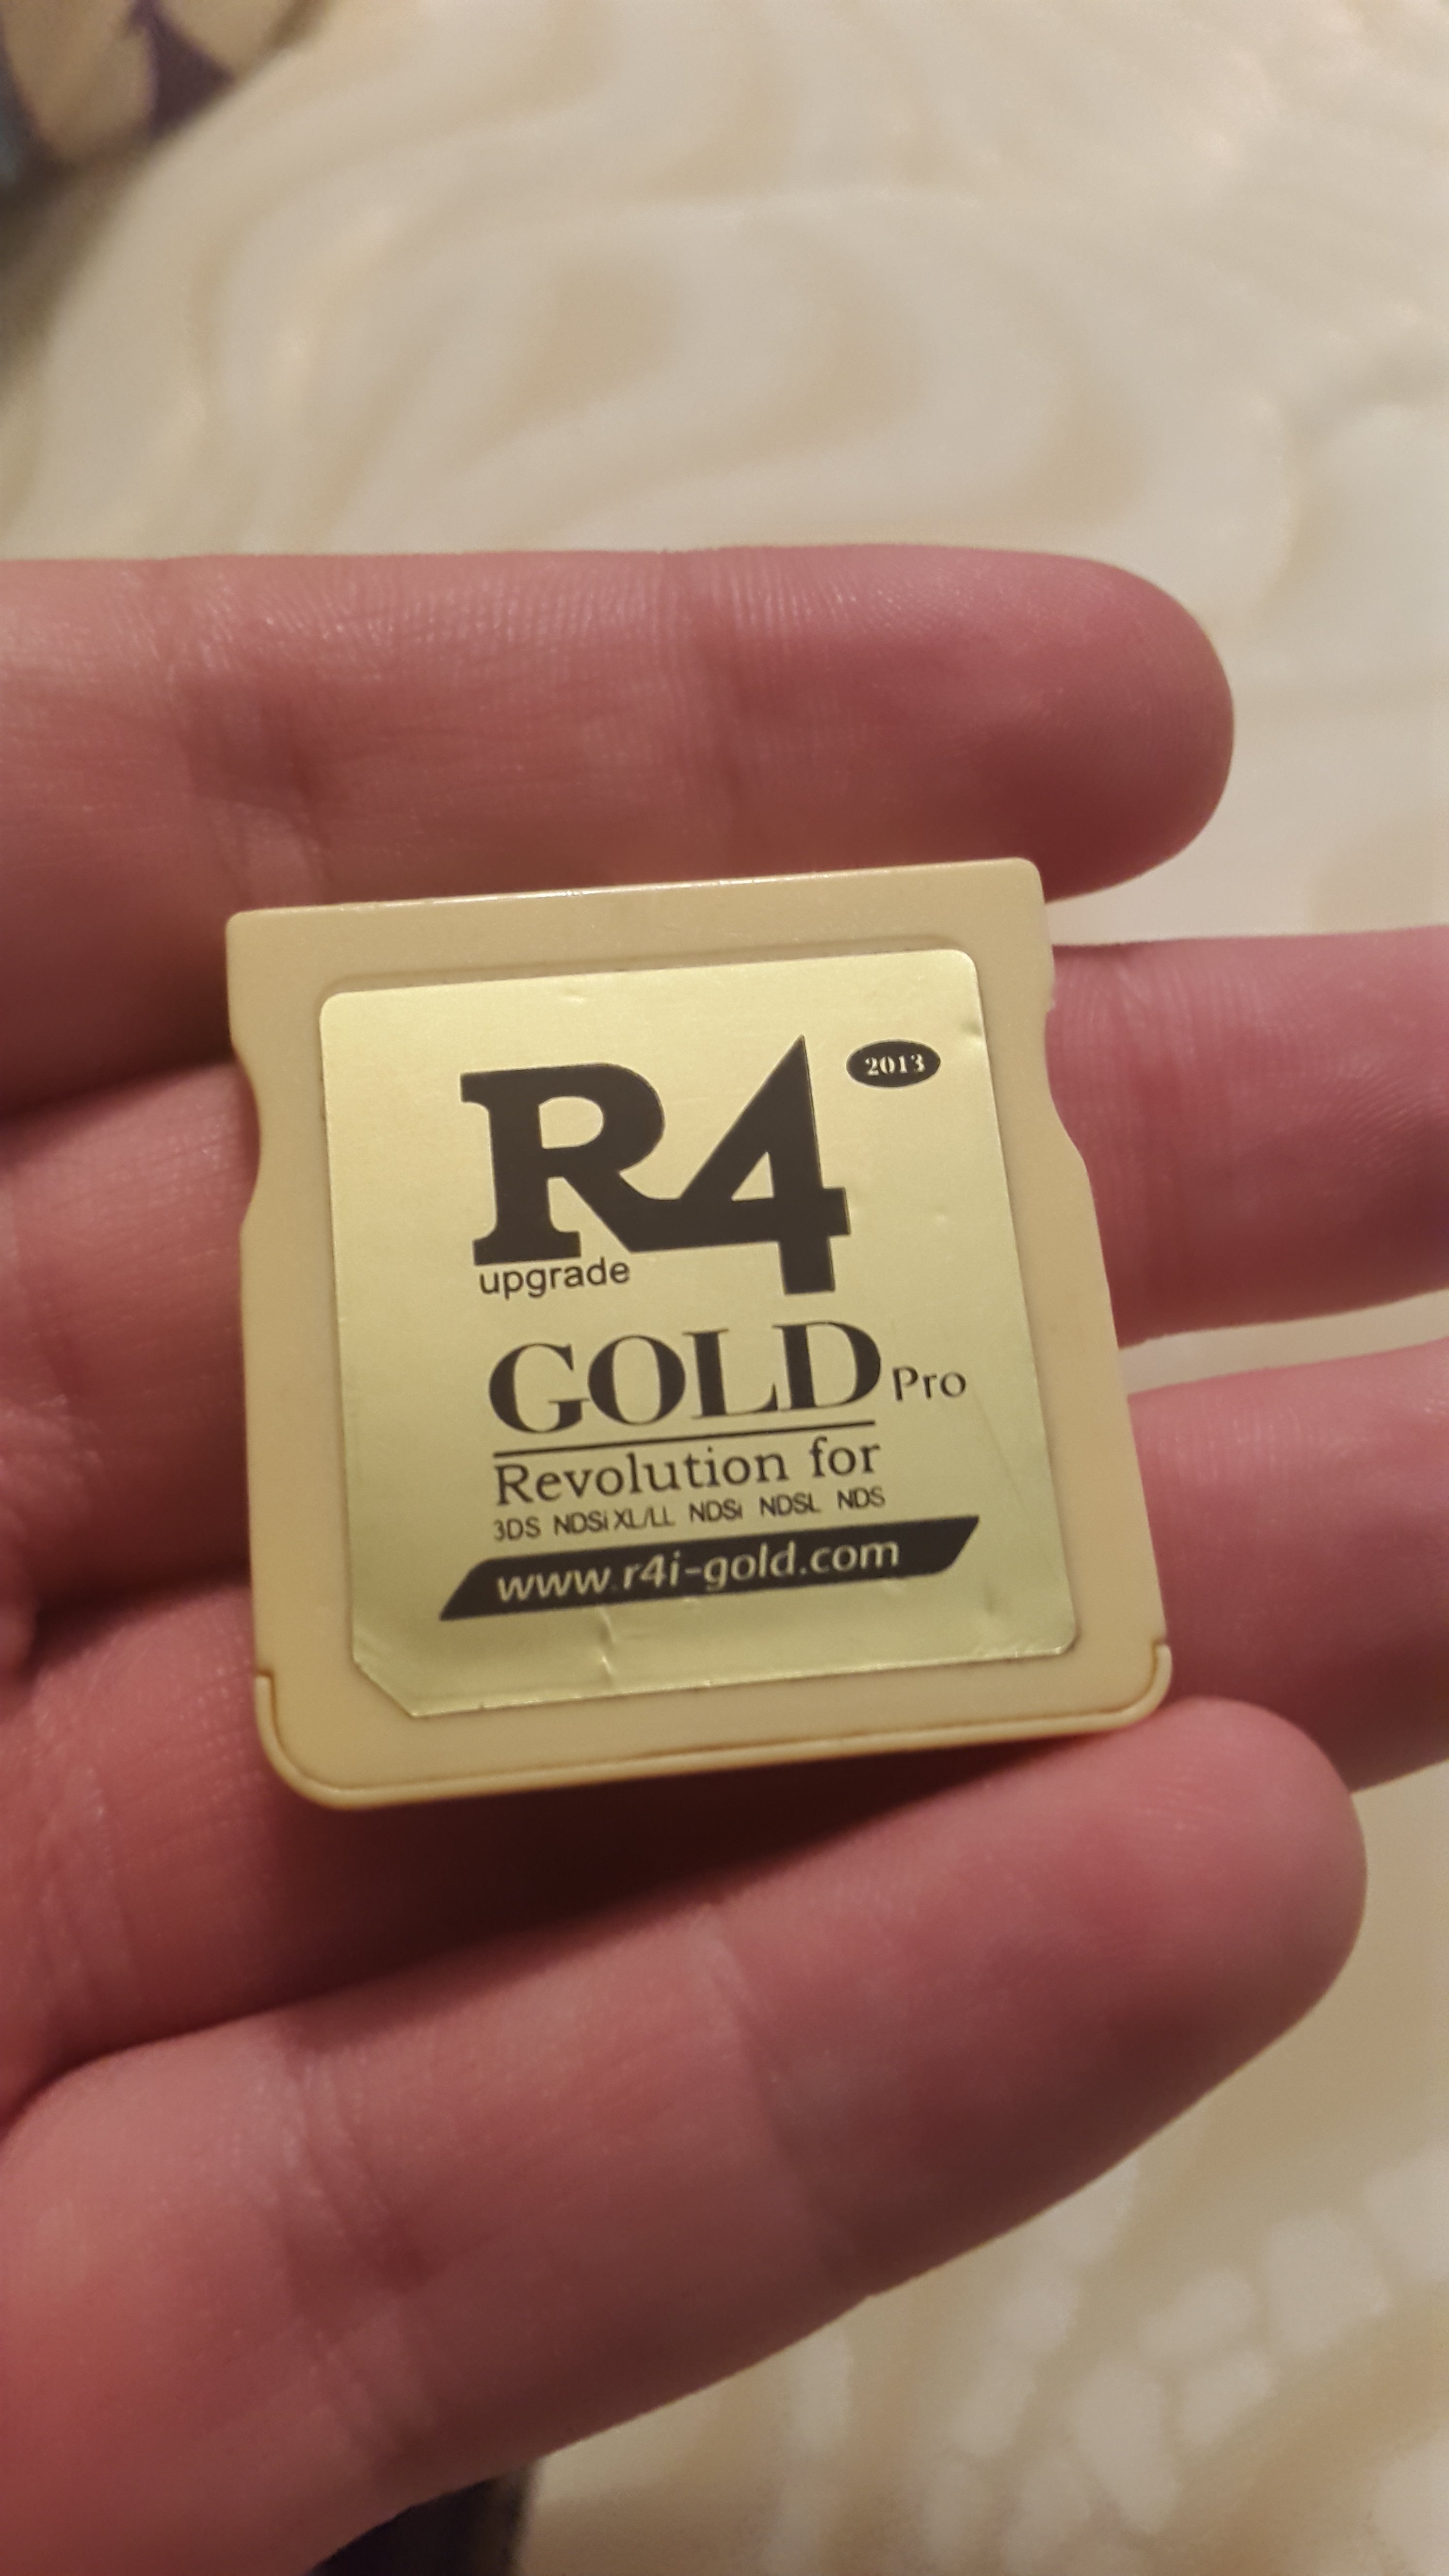 Need Firmware for this from www.r4i-gold.com - The Independent Video Game Community